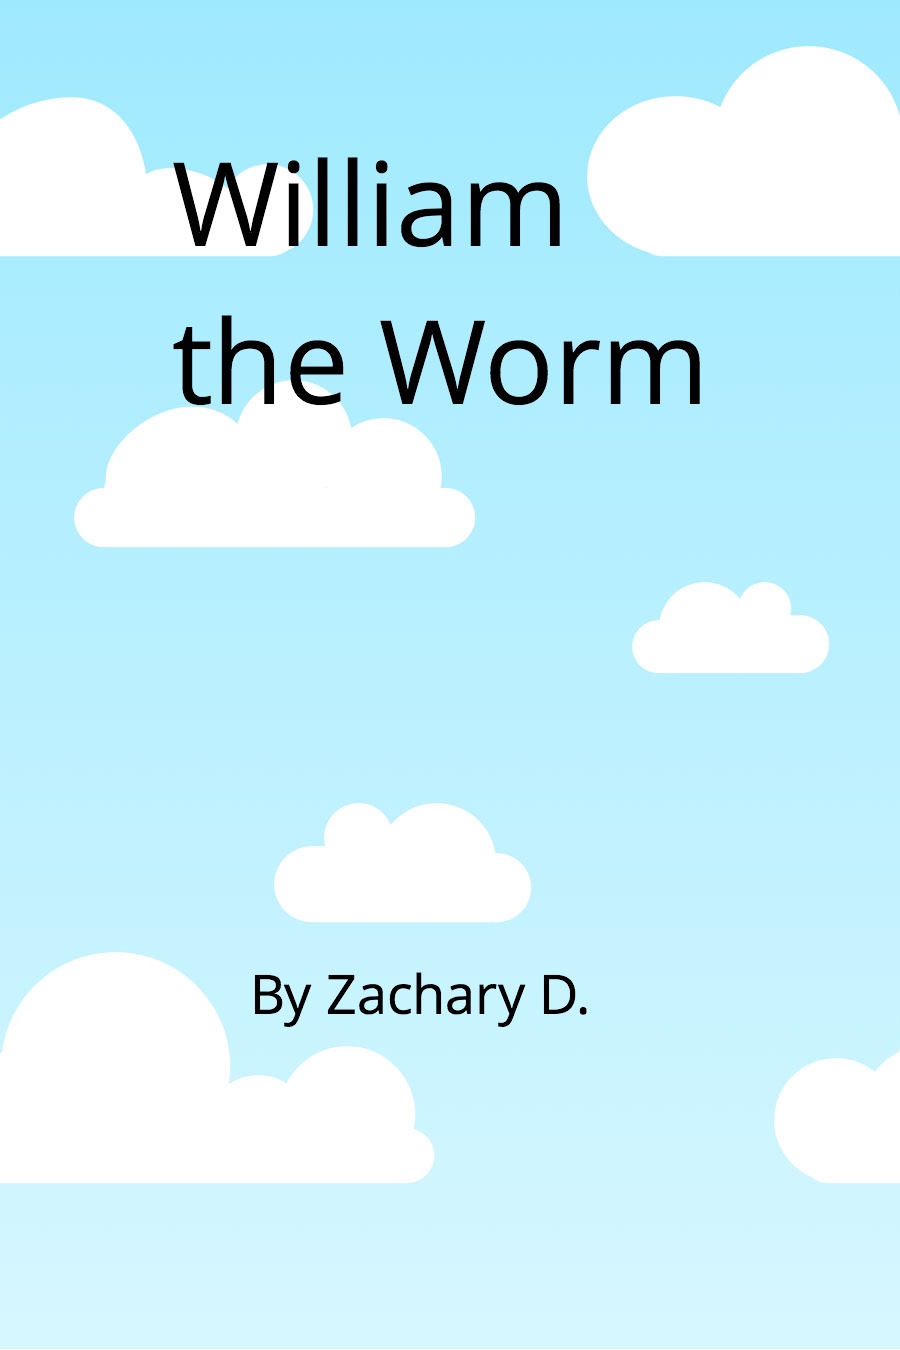 William the Worm by Zach D